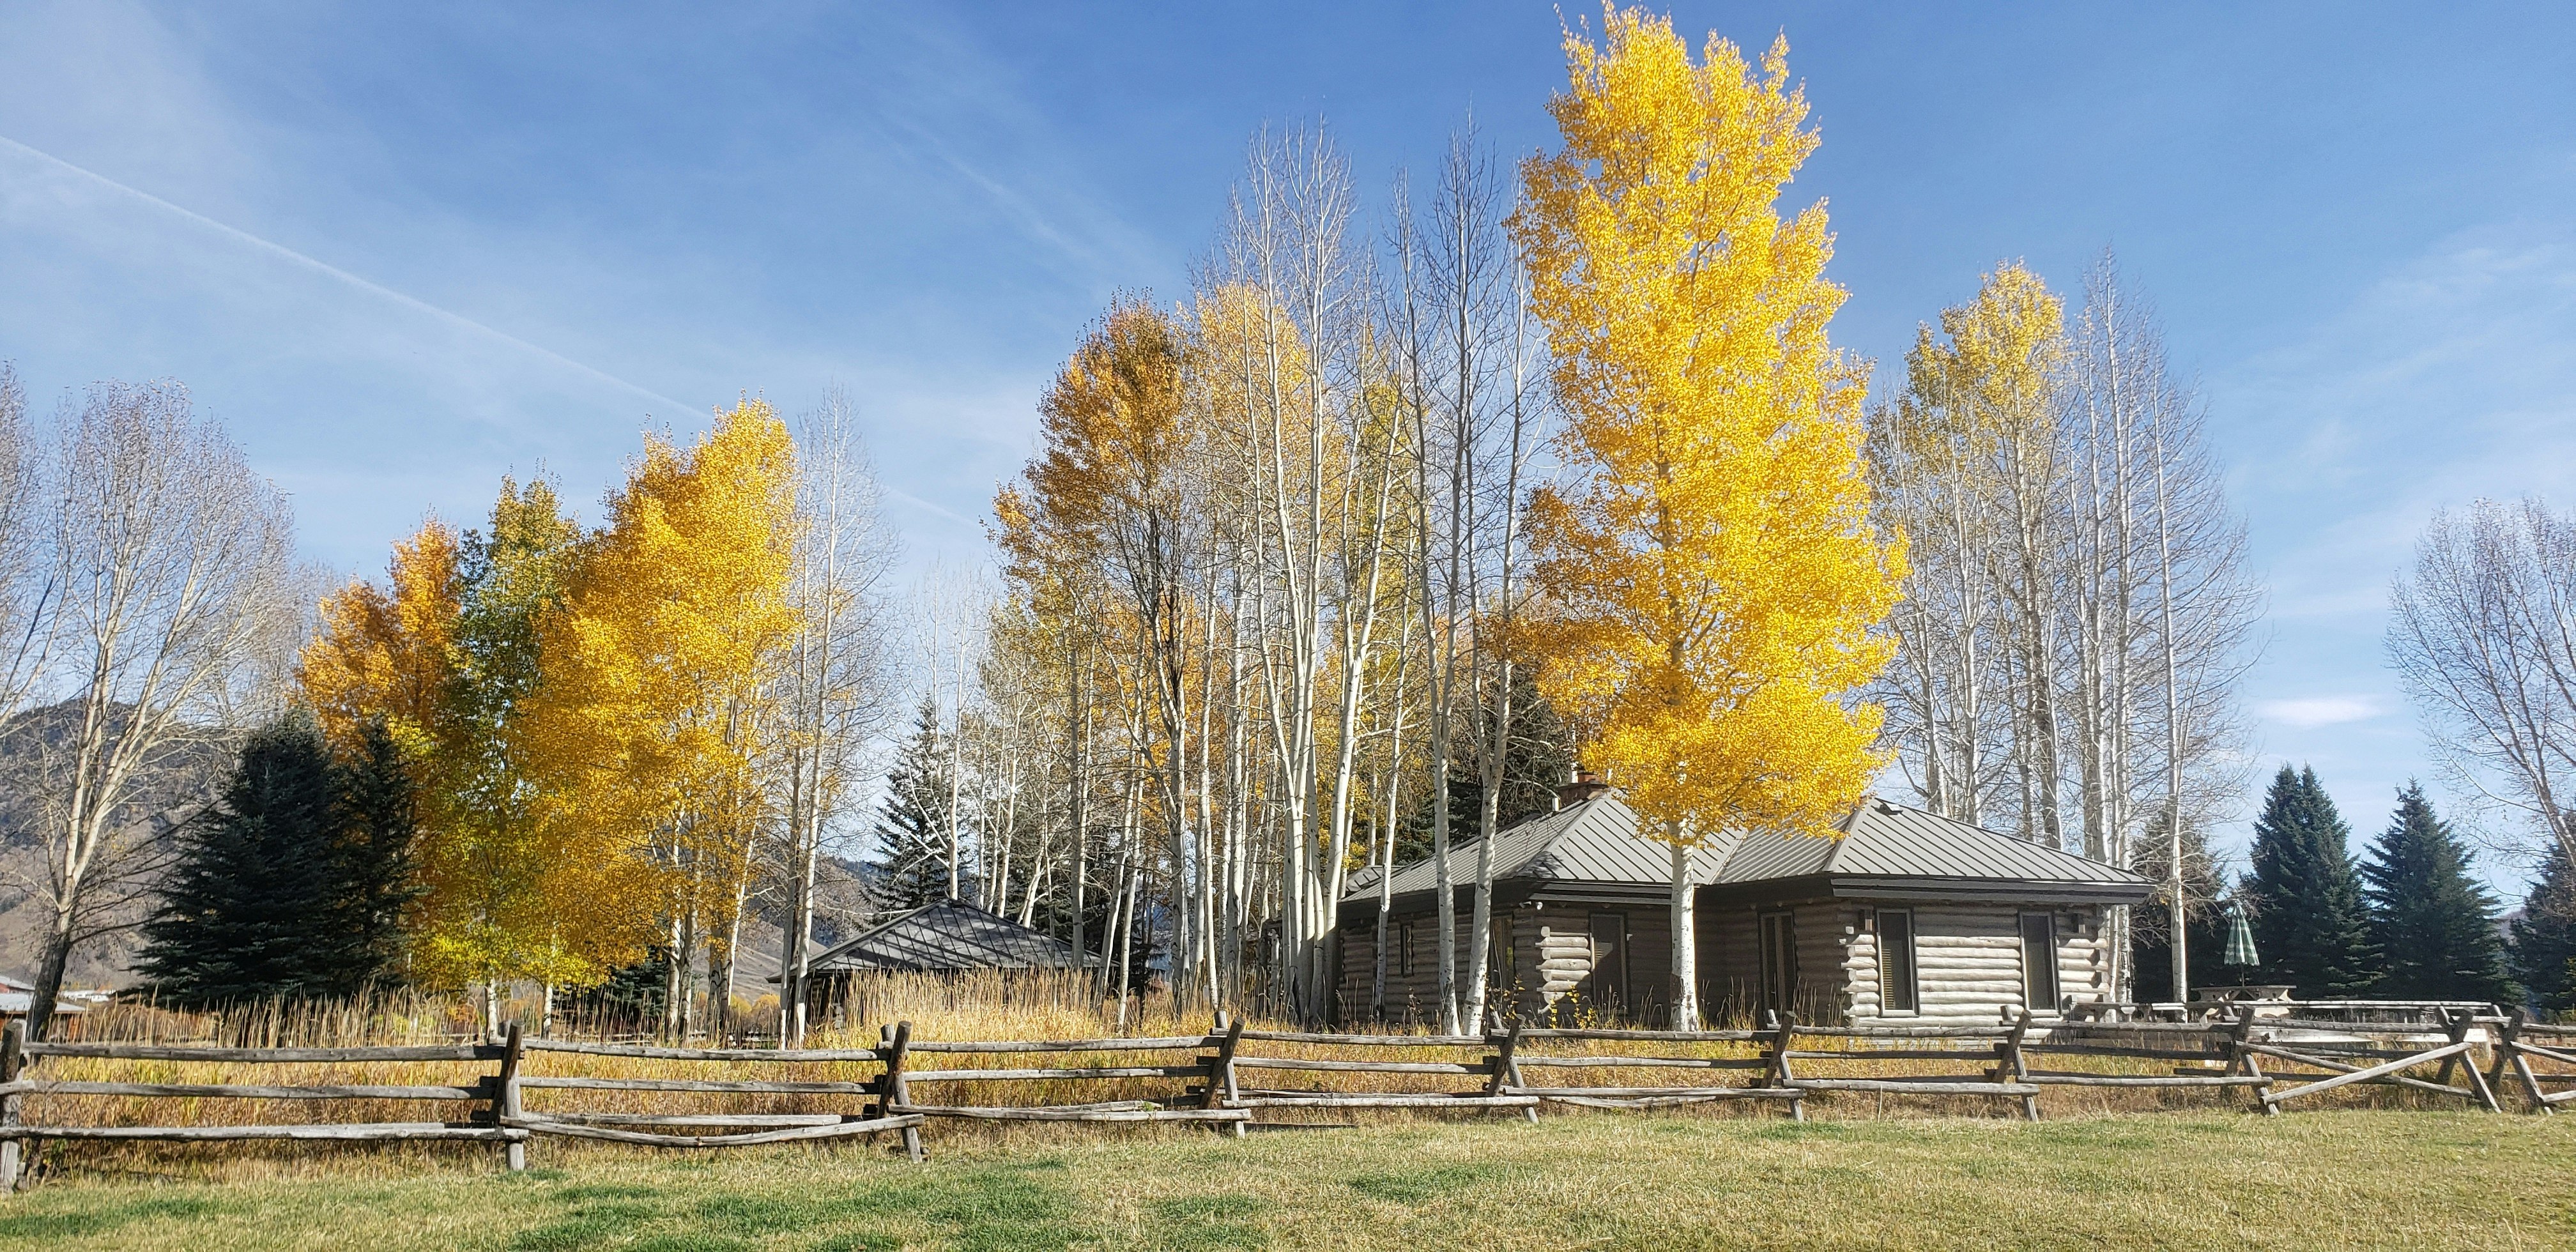 Jackson Ranch Aspens frames the scene in gold at Western Star Ranch which includes an 8-acre pasture and barn track plus a heated three-car garage and dog run 10 21 23